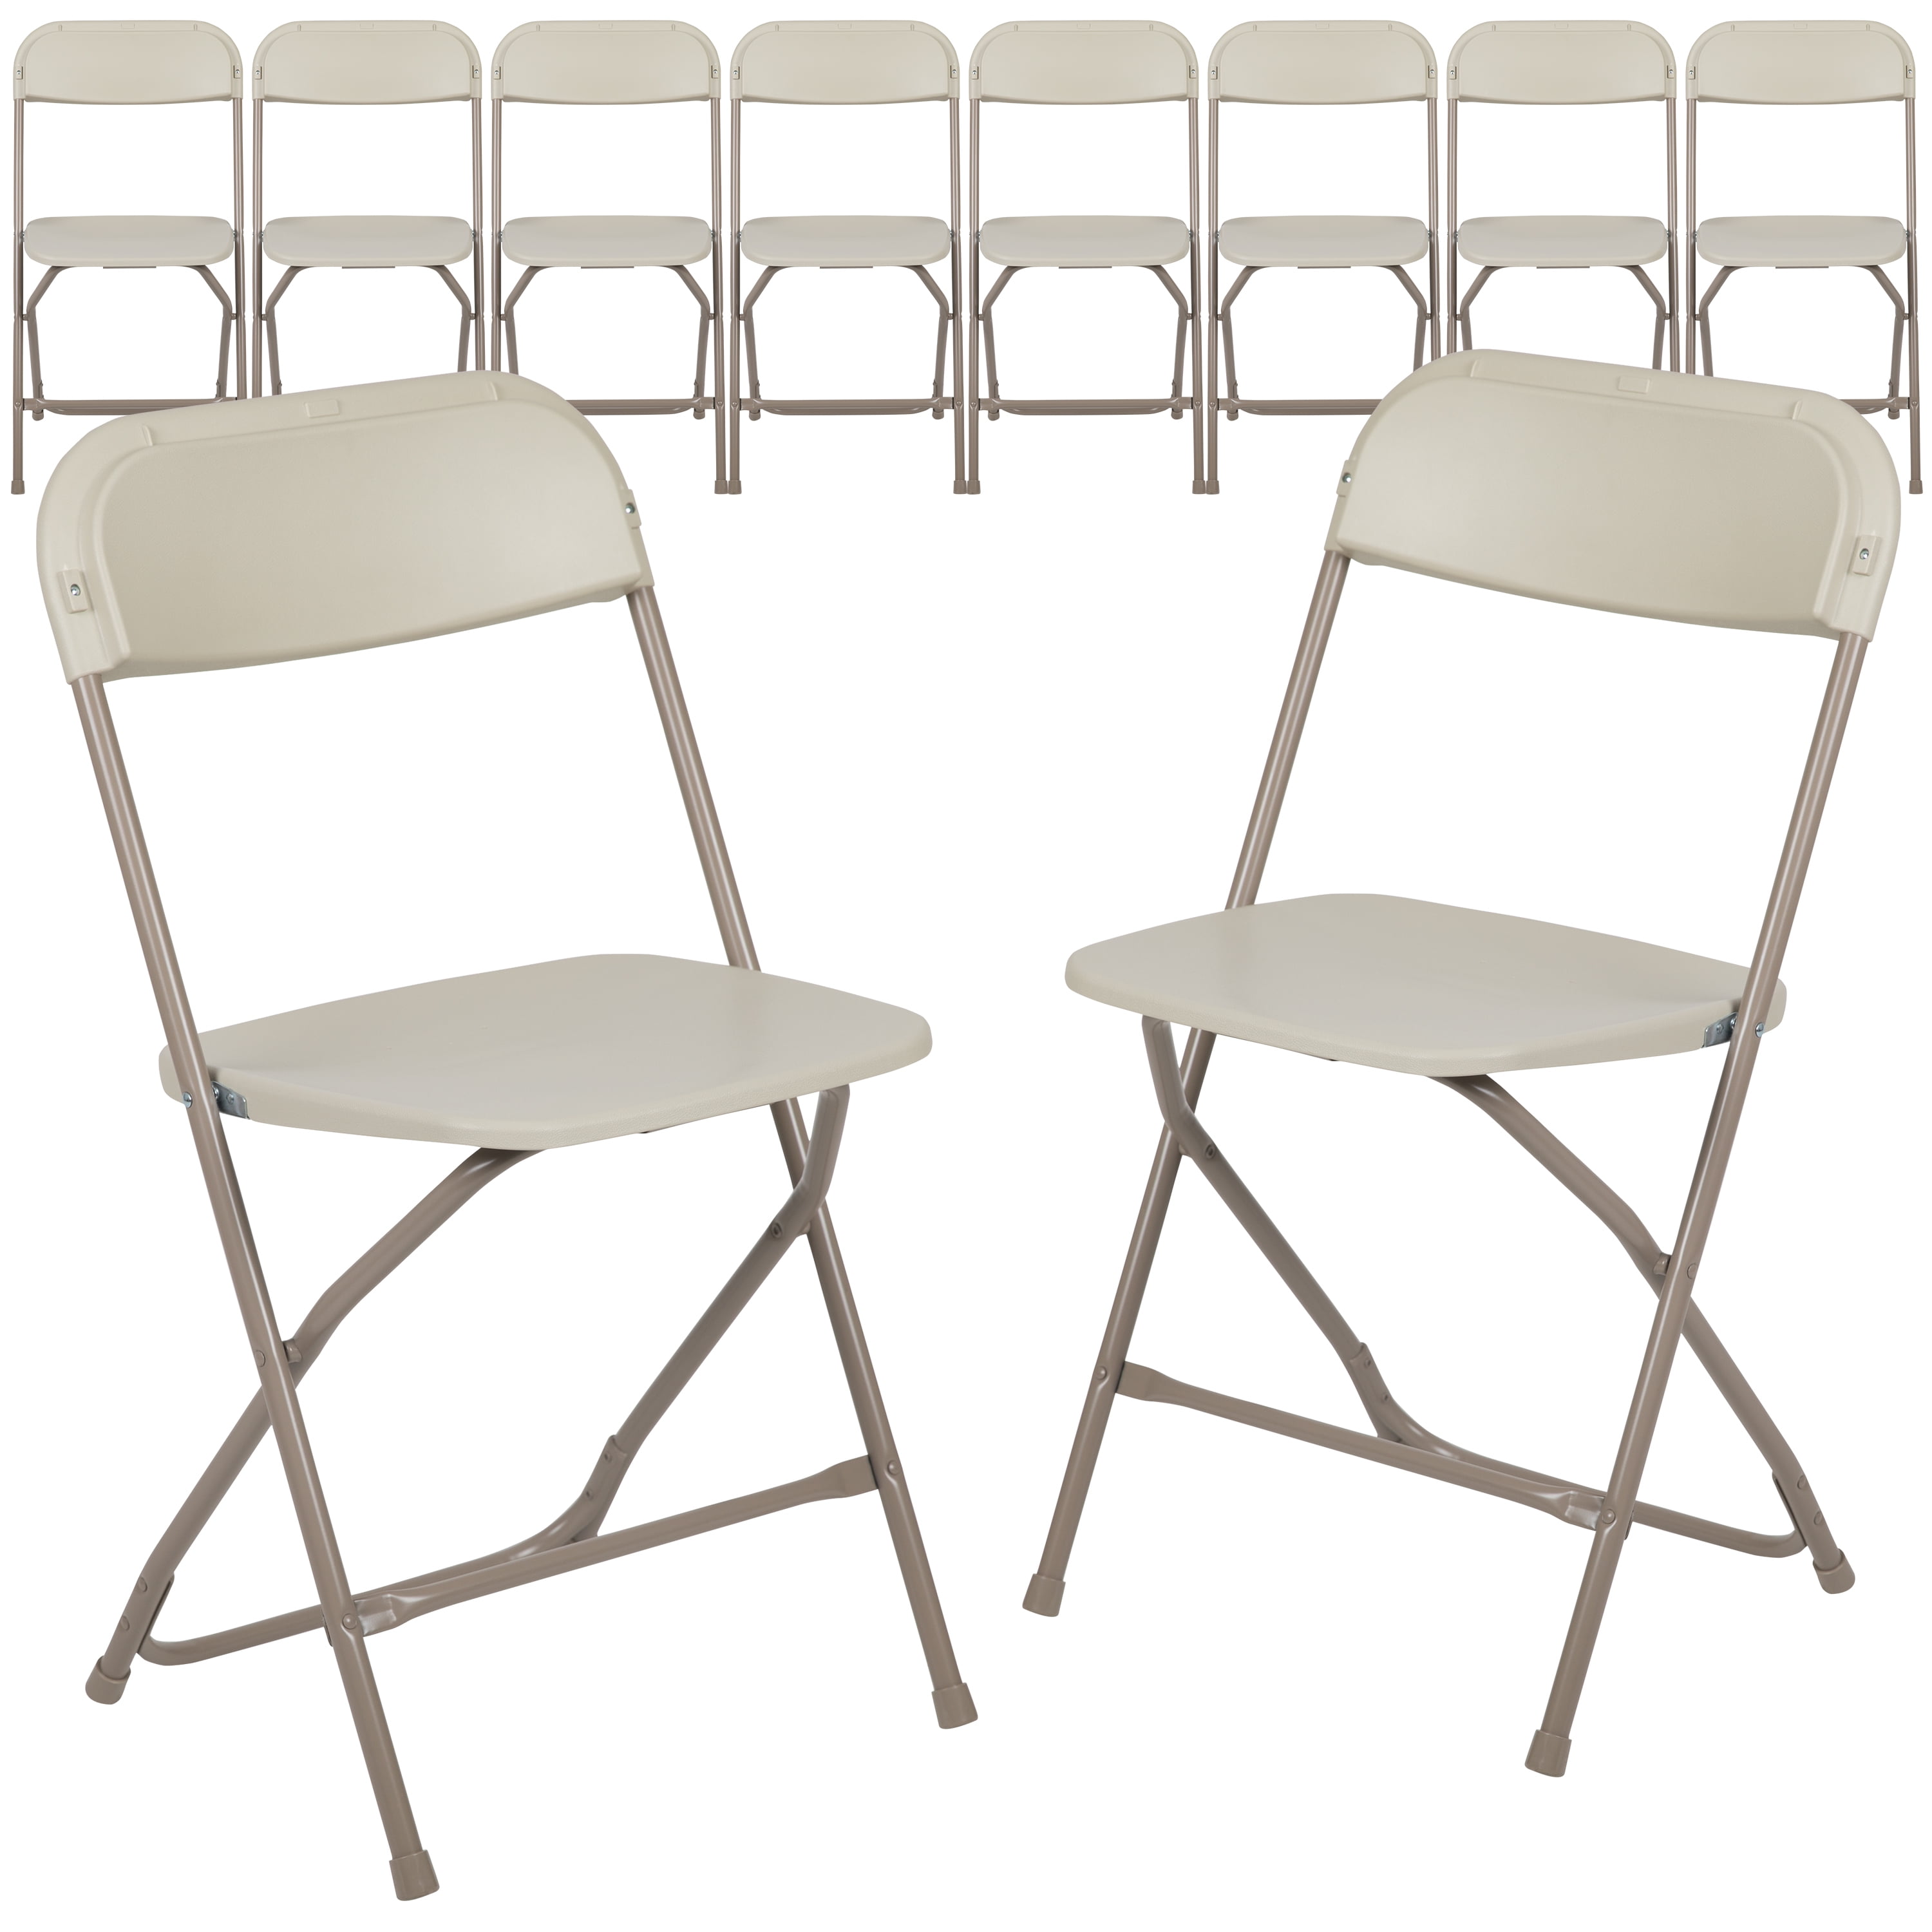 50 PACK 650 Lbs Weight Capacity Commercial Quality White Plastic Folding Chair 